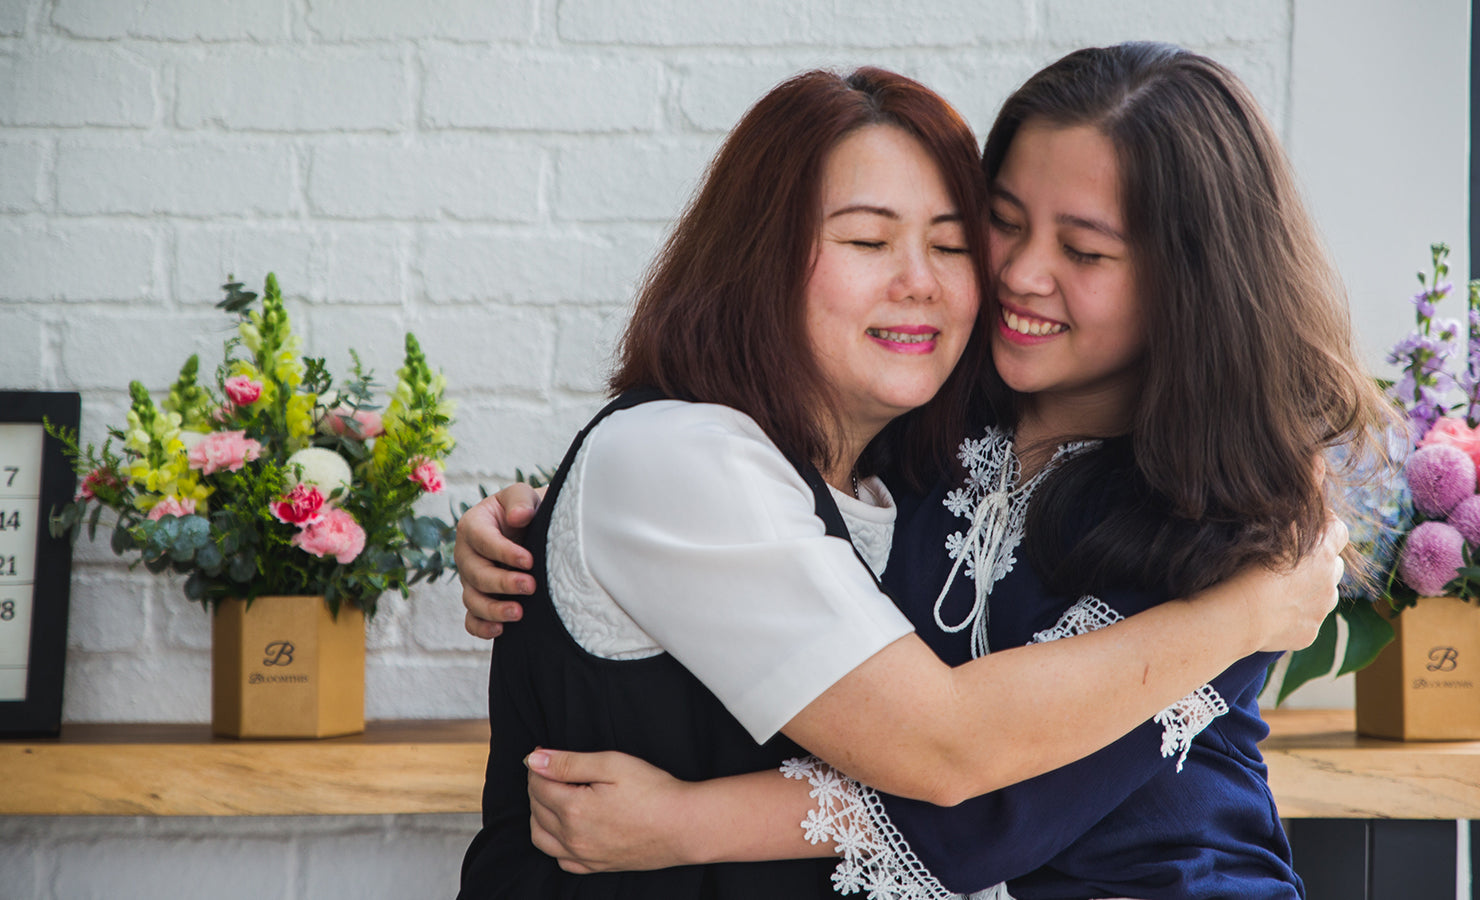 7 ways to impress your mom in 12 hours or less